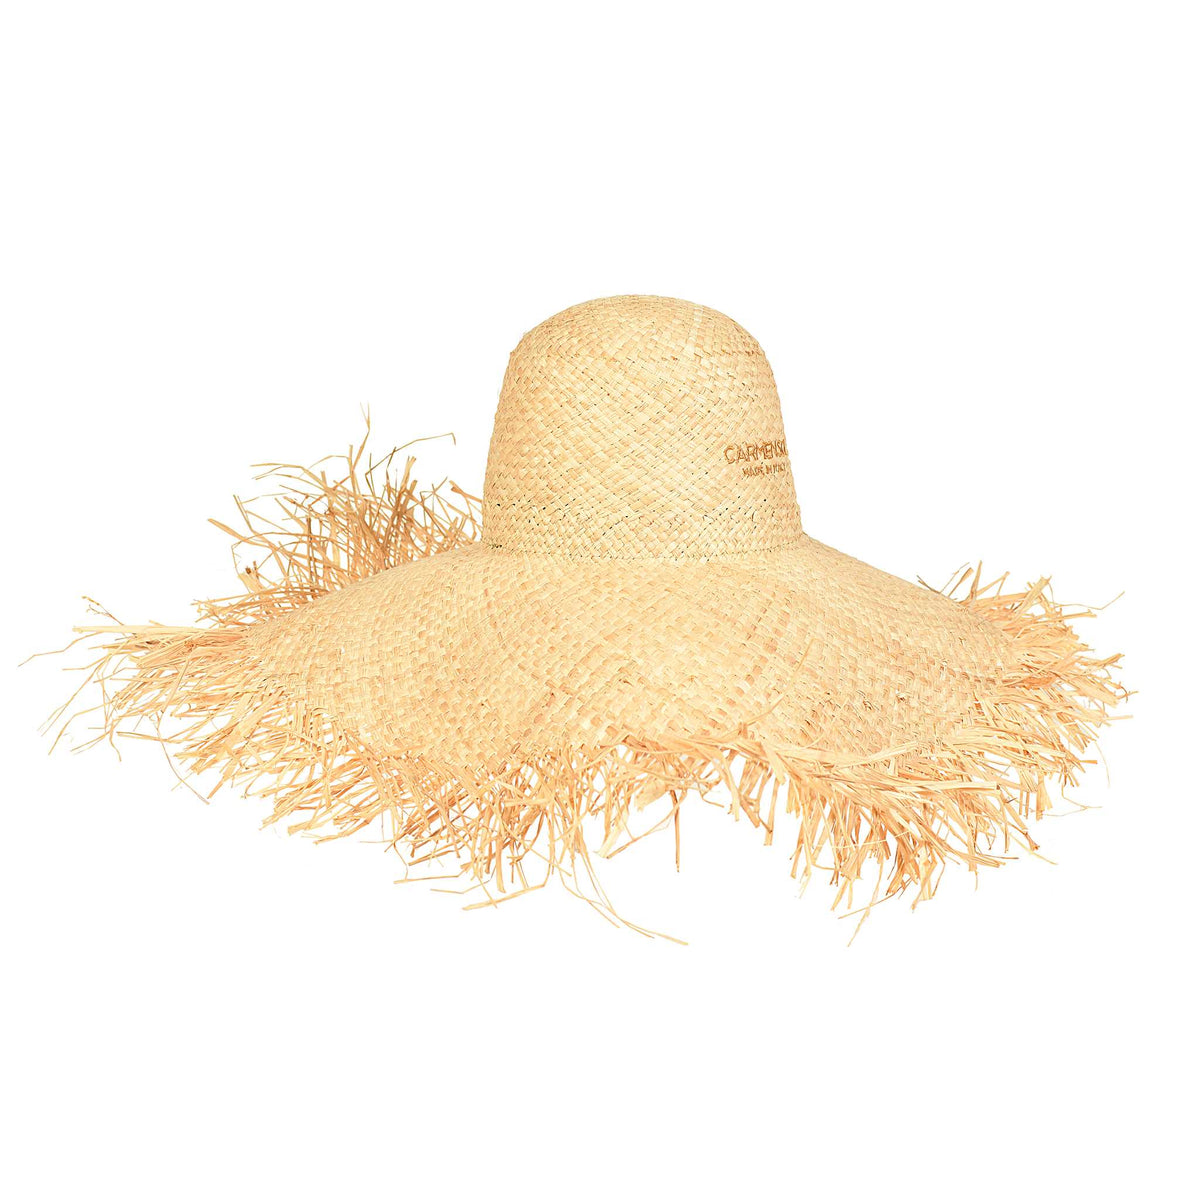 Carmen Sol Severino sun hat in color nude which are handcrafted from Italy